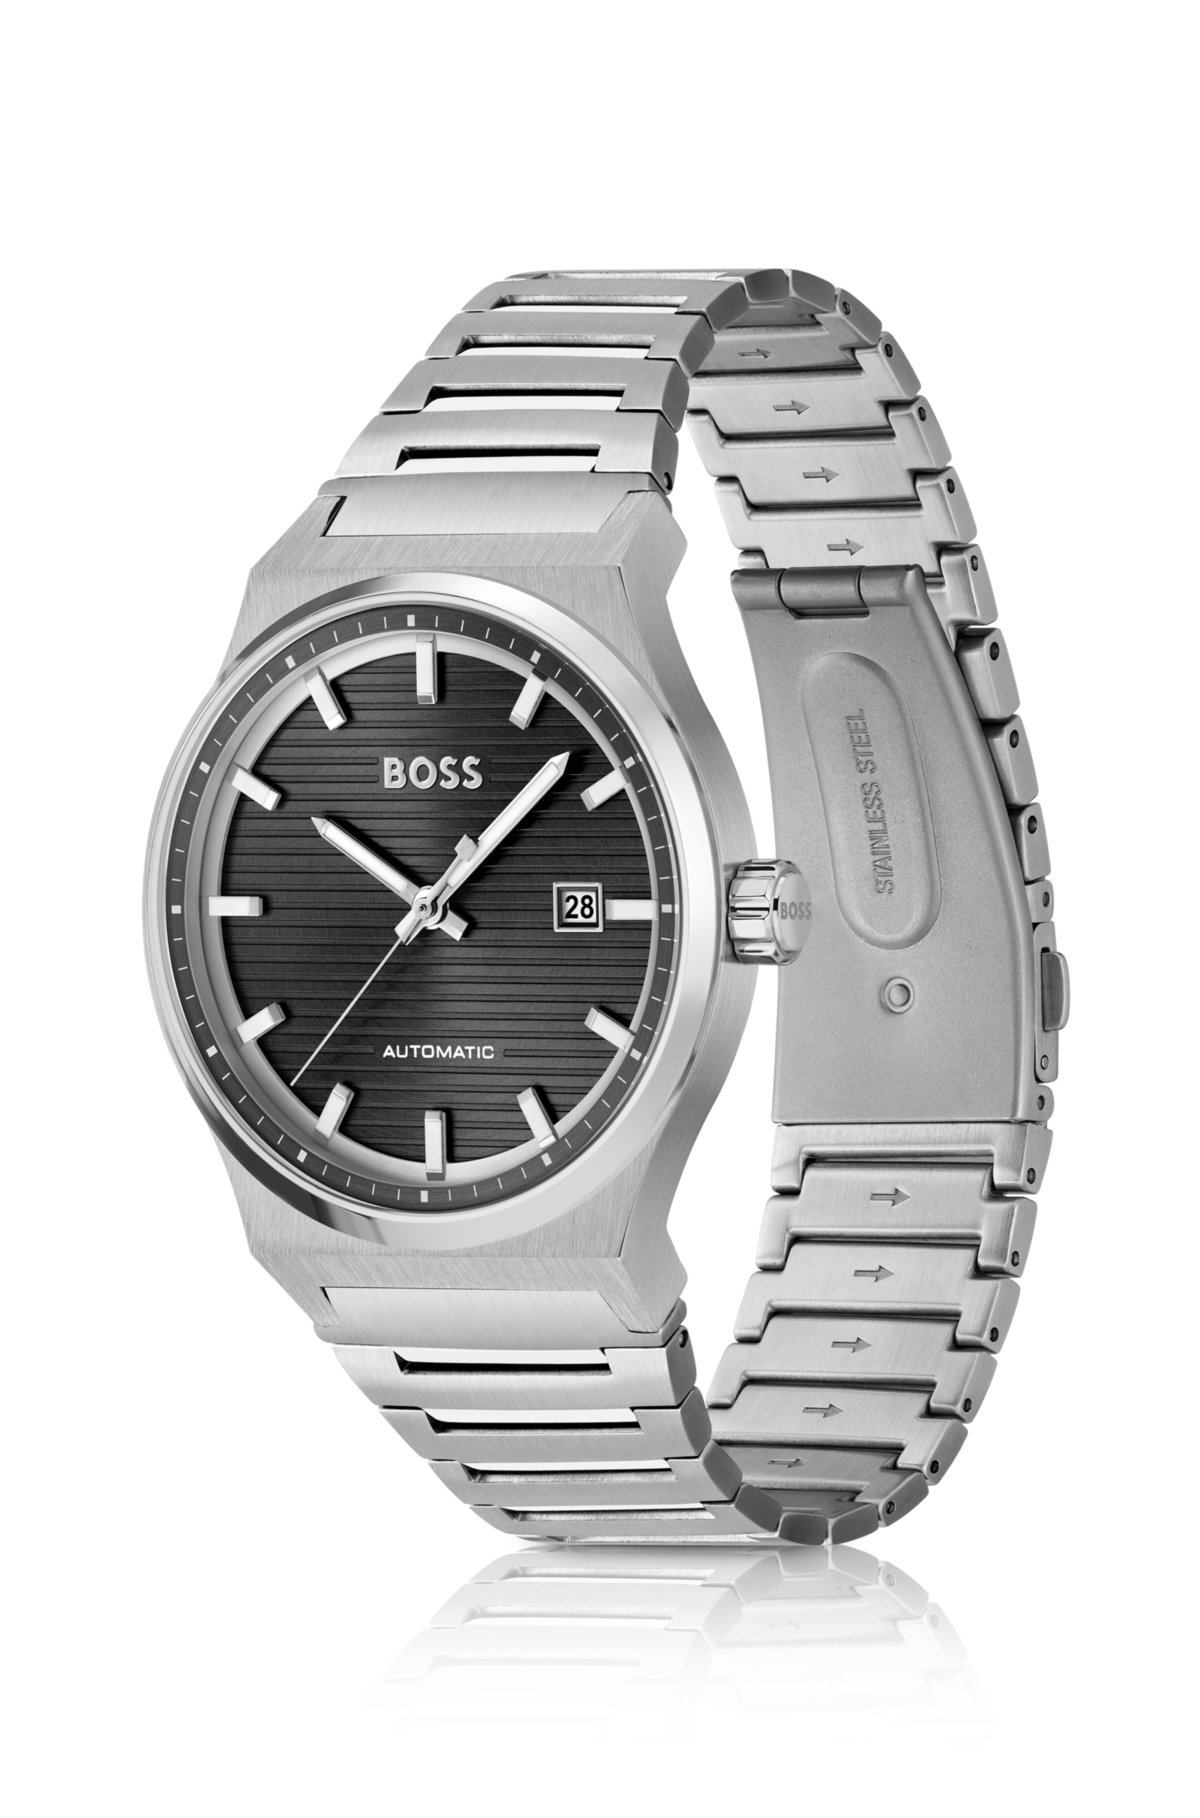 BOSS - Link-bracelet dial with watch automatic groove-textured